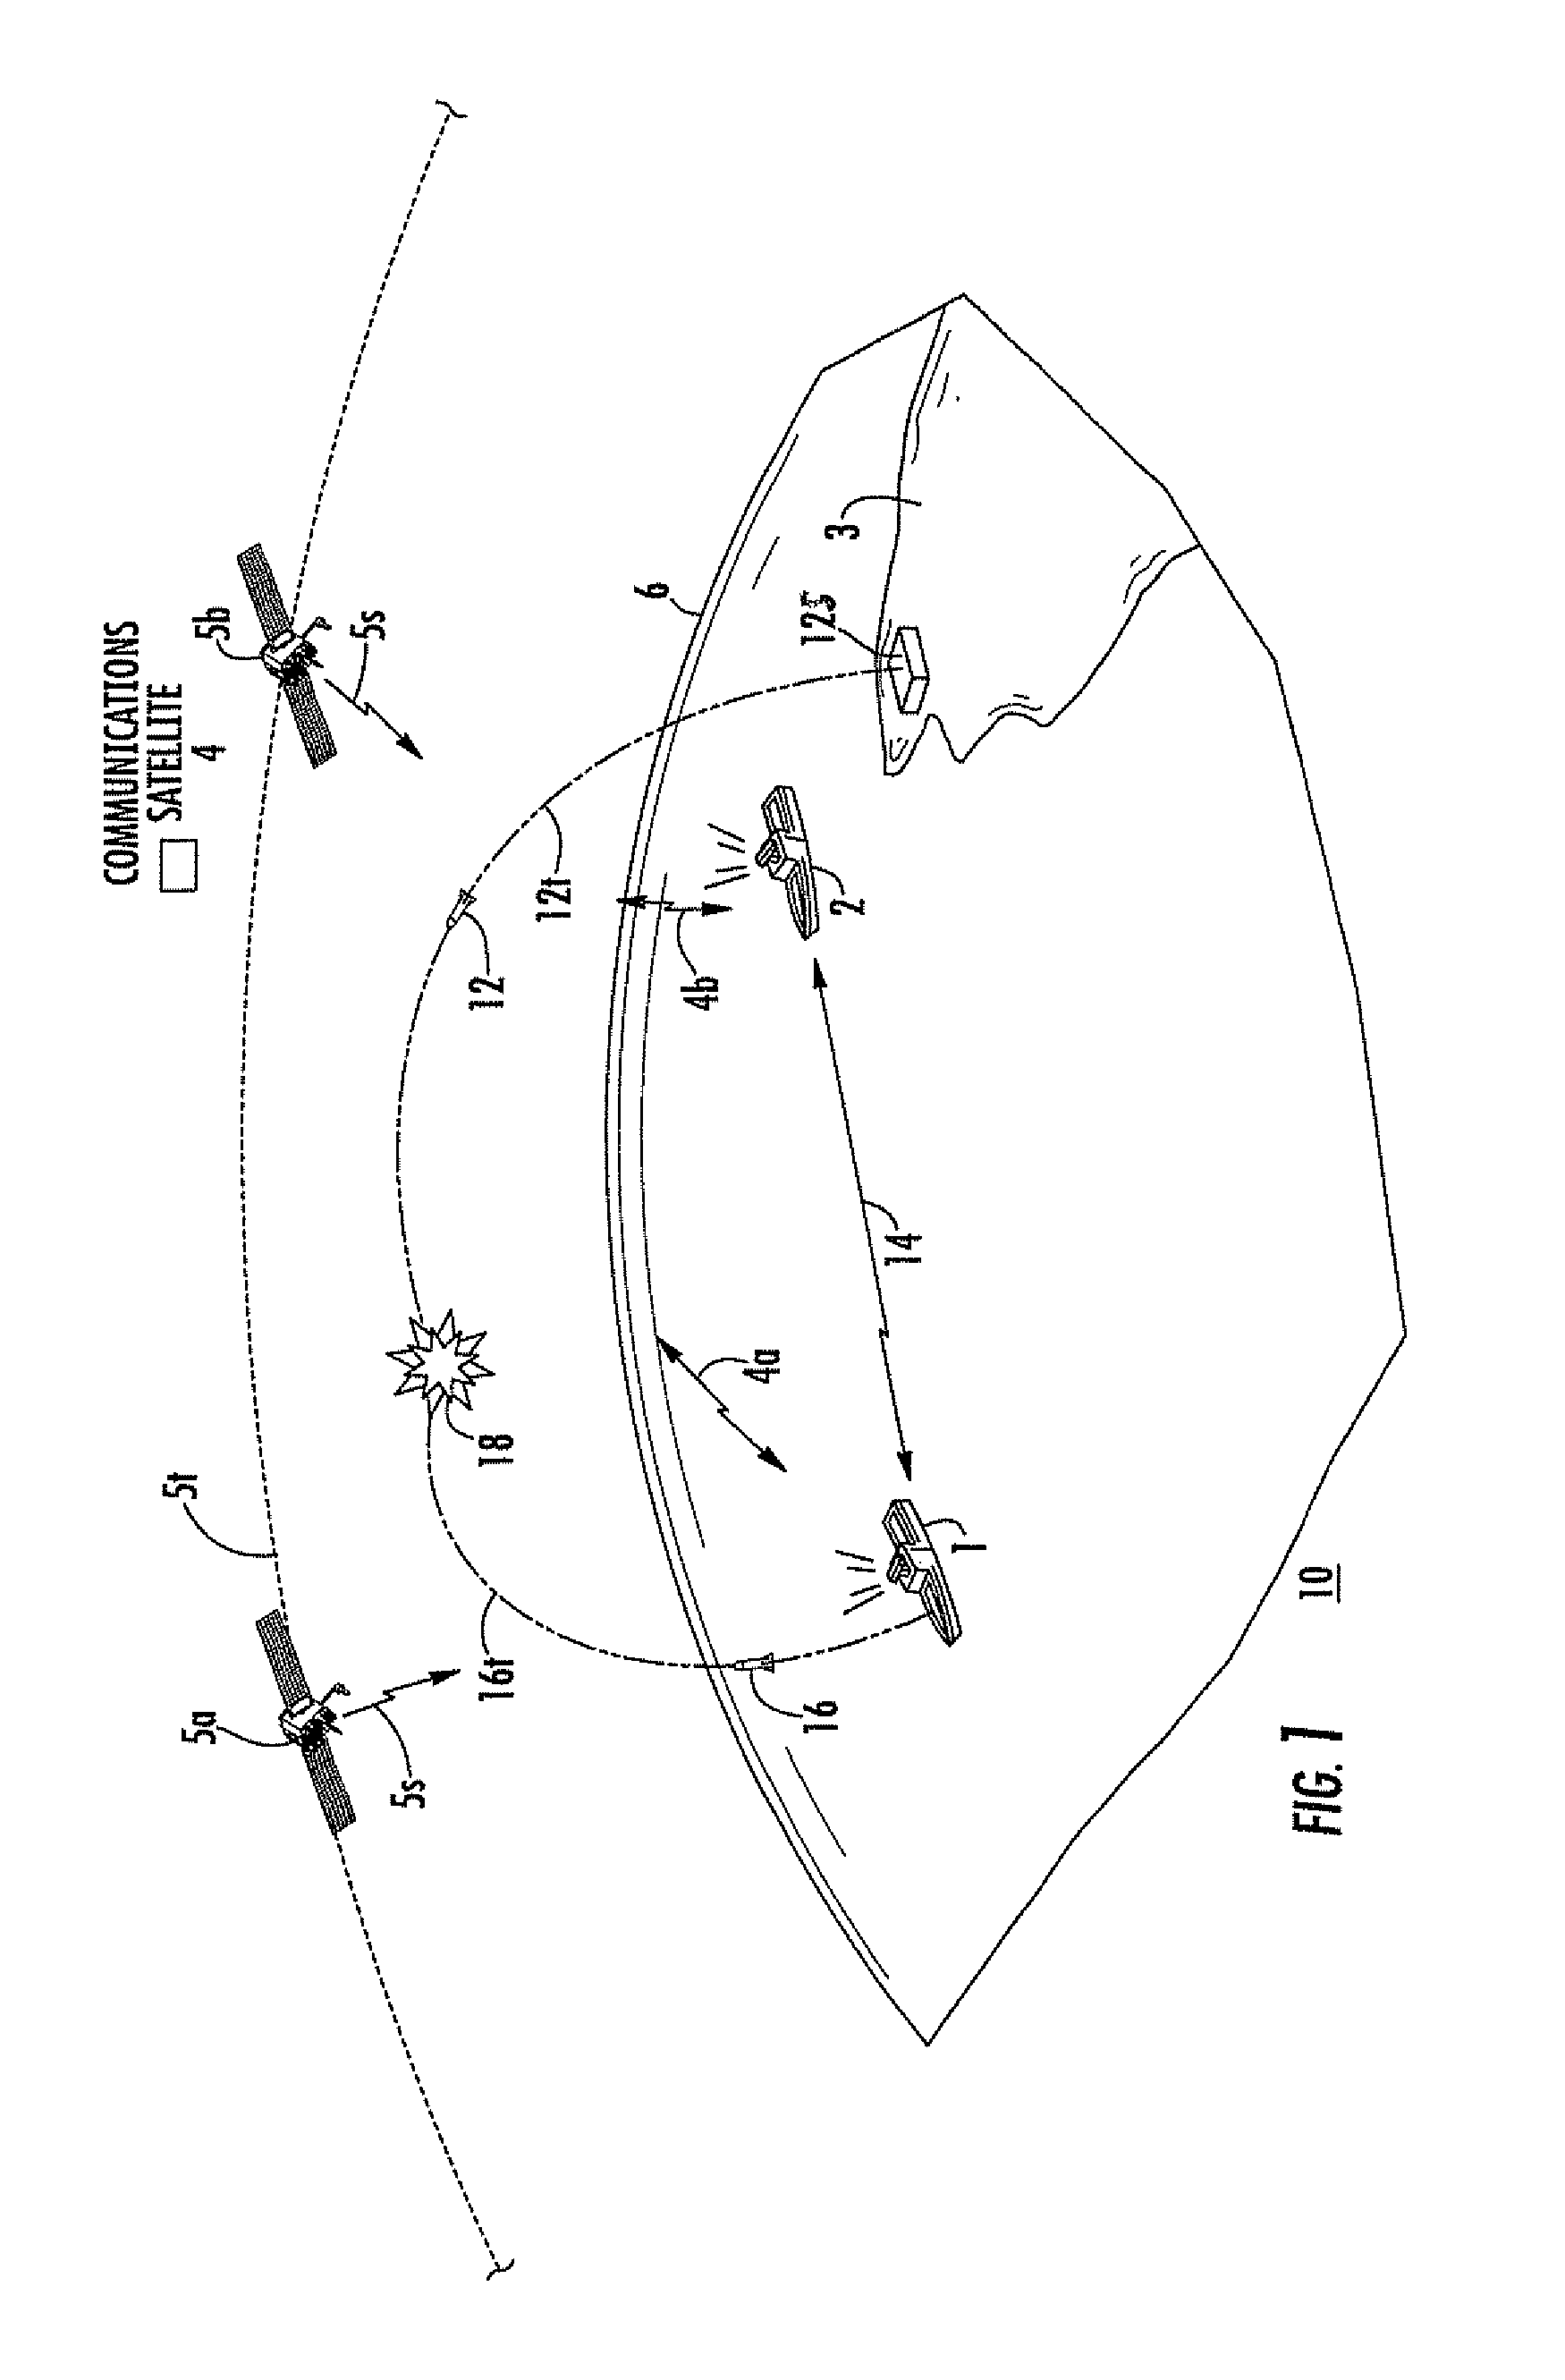 Unified navigation and inertial target tracking estimation system